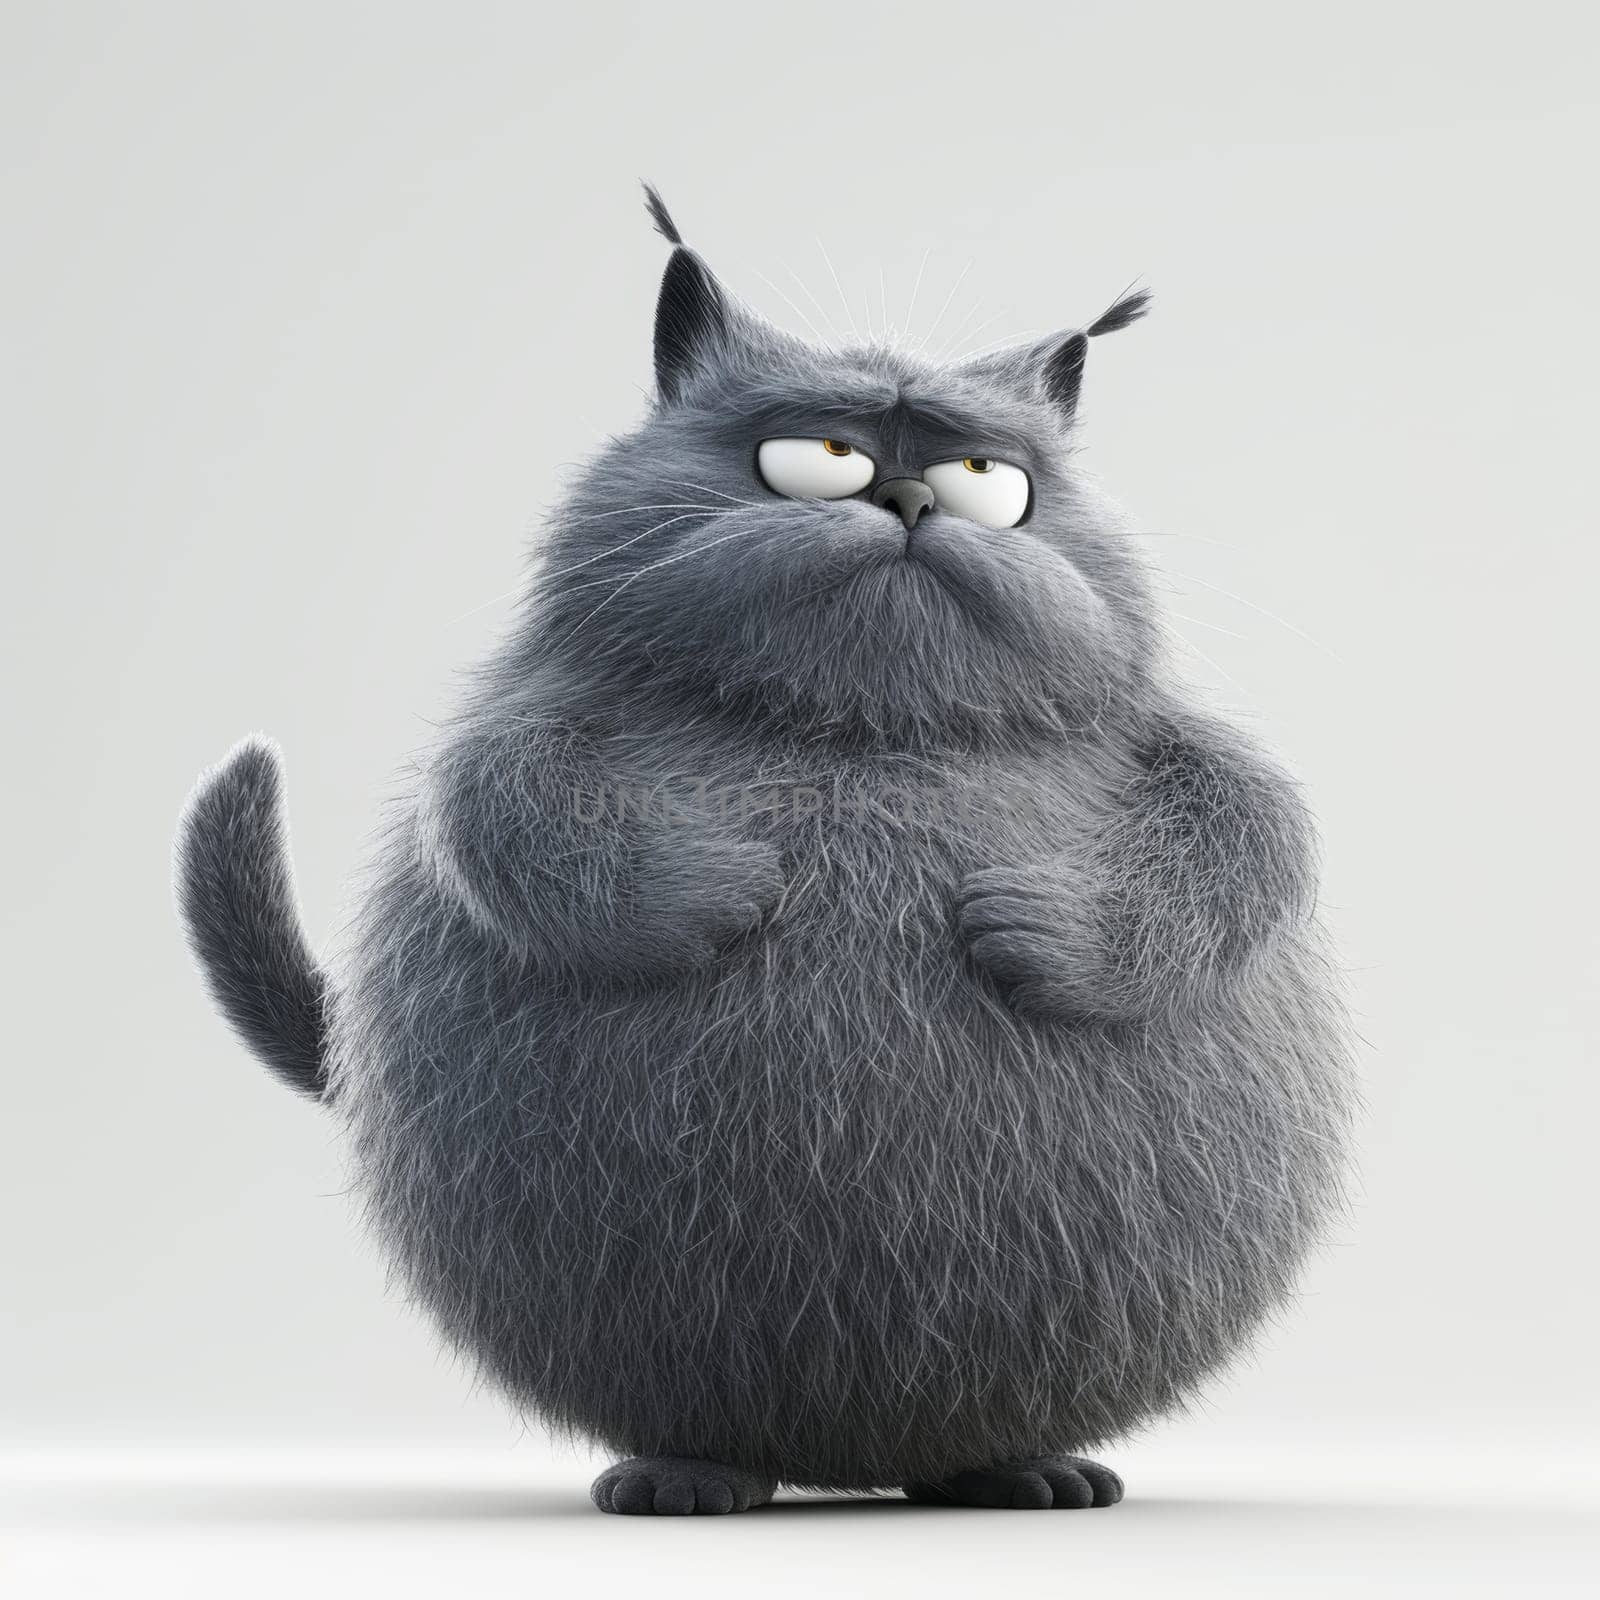 the character of a fat cute fluffy grey cat on a white background. 3d illustration.